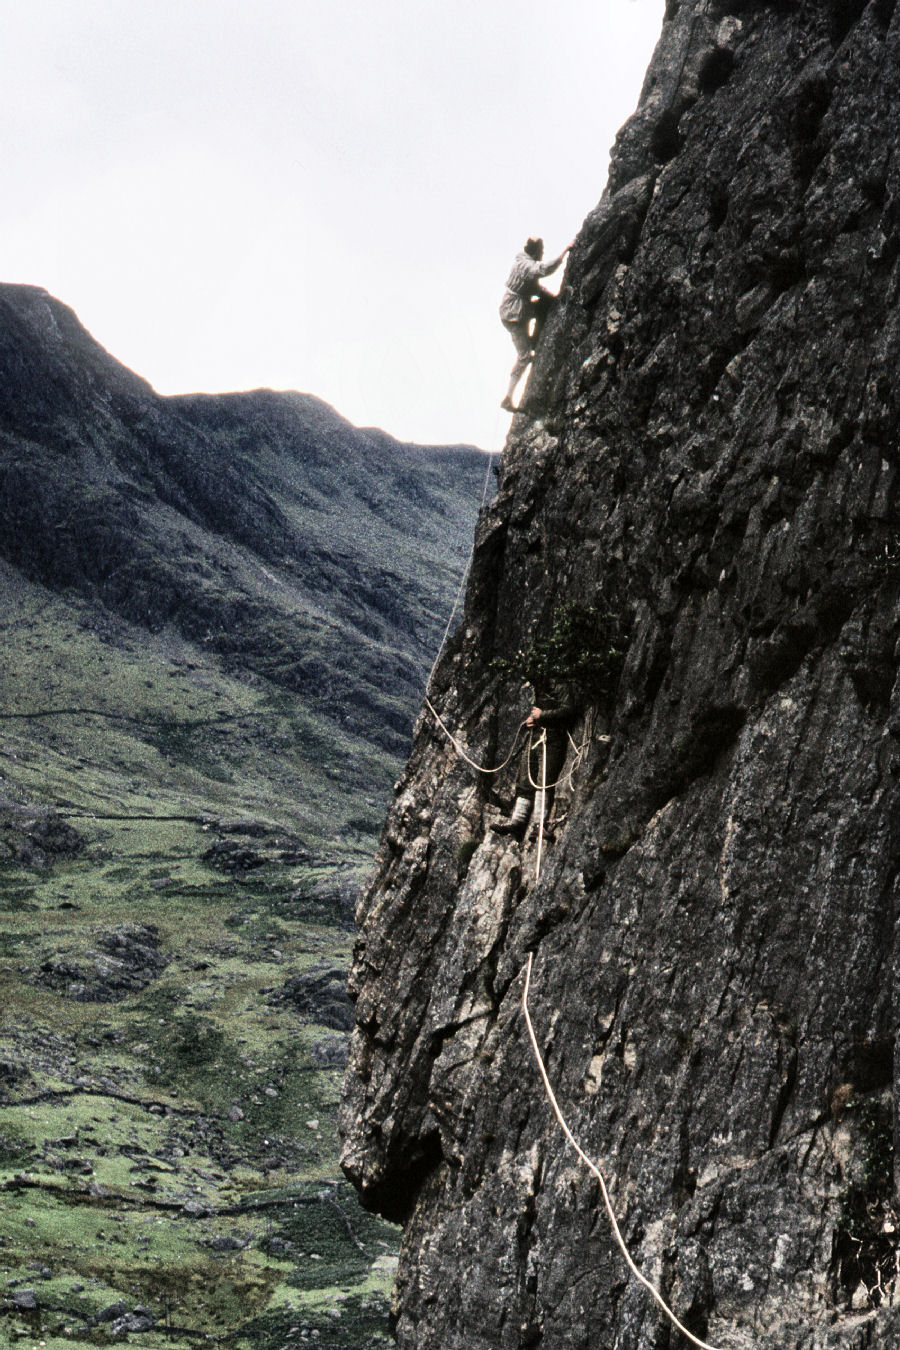 1961or2 - llanberis pass - ScanMts148